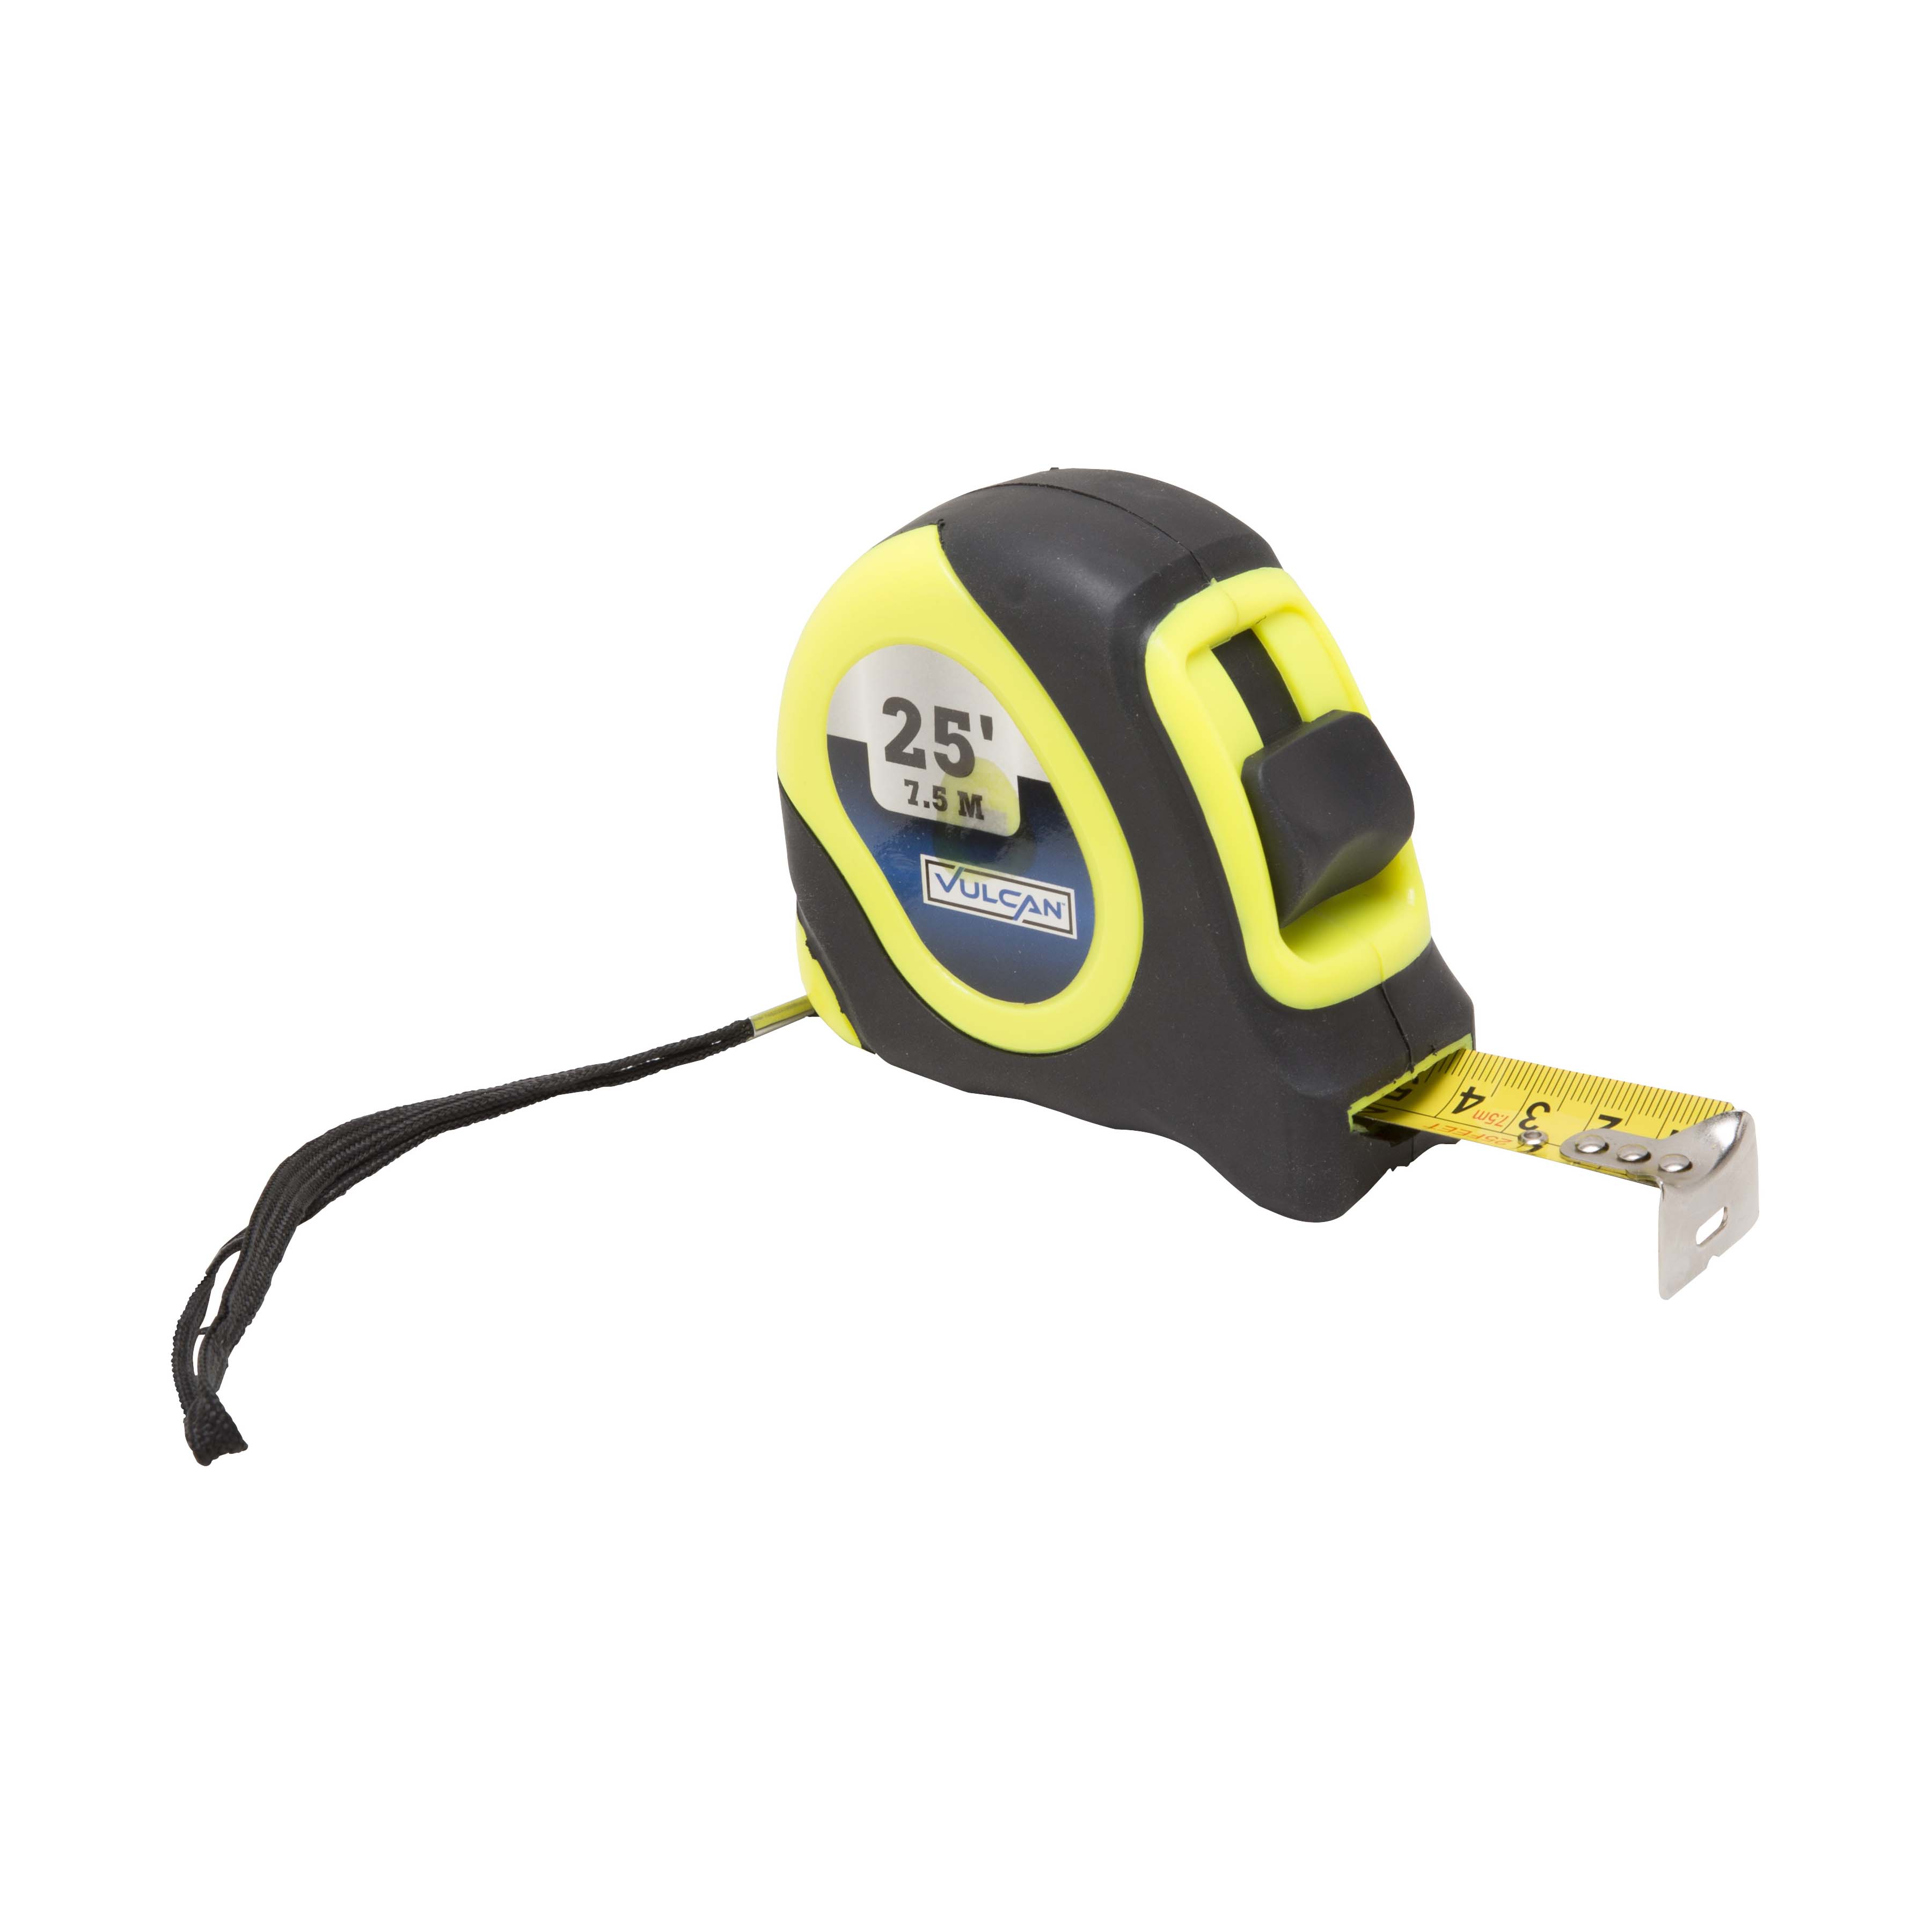 26-7.5X25-G Tape Measure, 25 ft L Blade, 1 in W Blade, Steel Blade, ABS Plastic Case, Lime Case